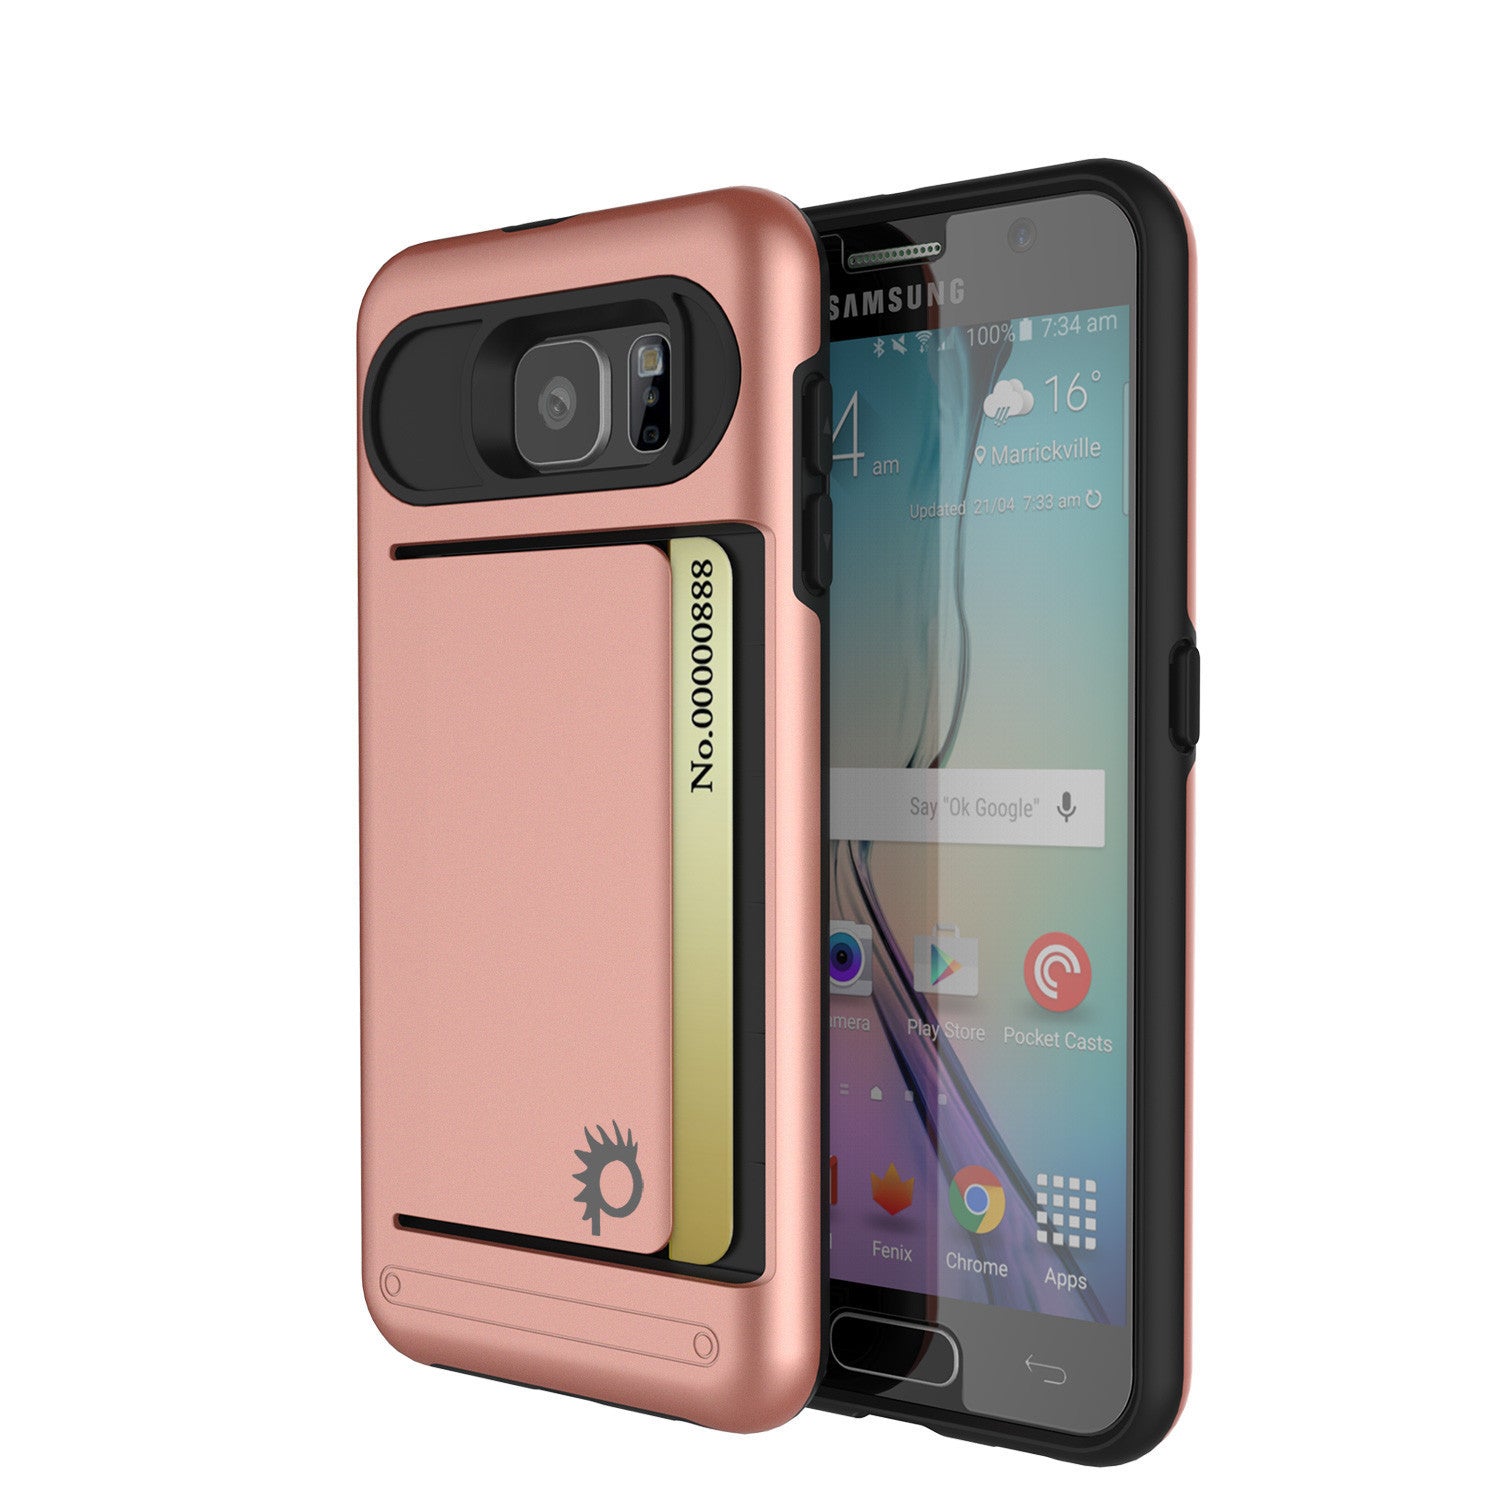 Galaxy S6 EDGE Case PunkCase CLUTCH Rose Gold Series Slim Armor Soft Cover Case w/ Screen Protector (Color in image: Rose Gold)